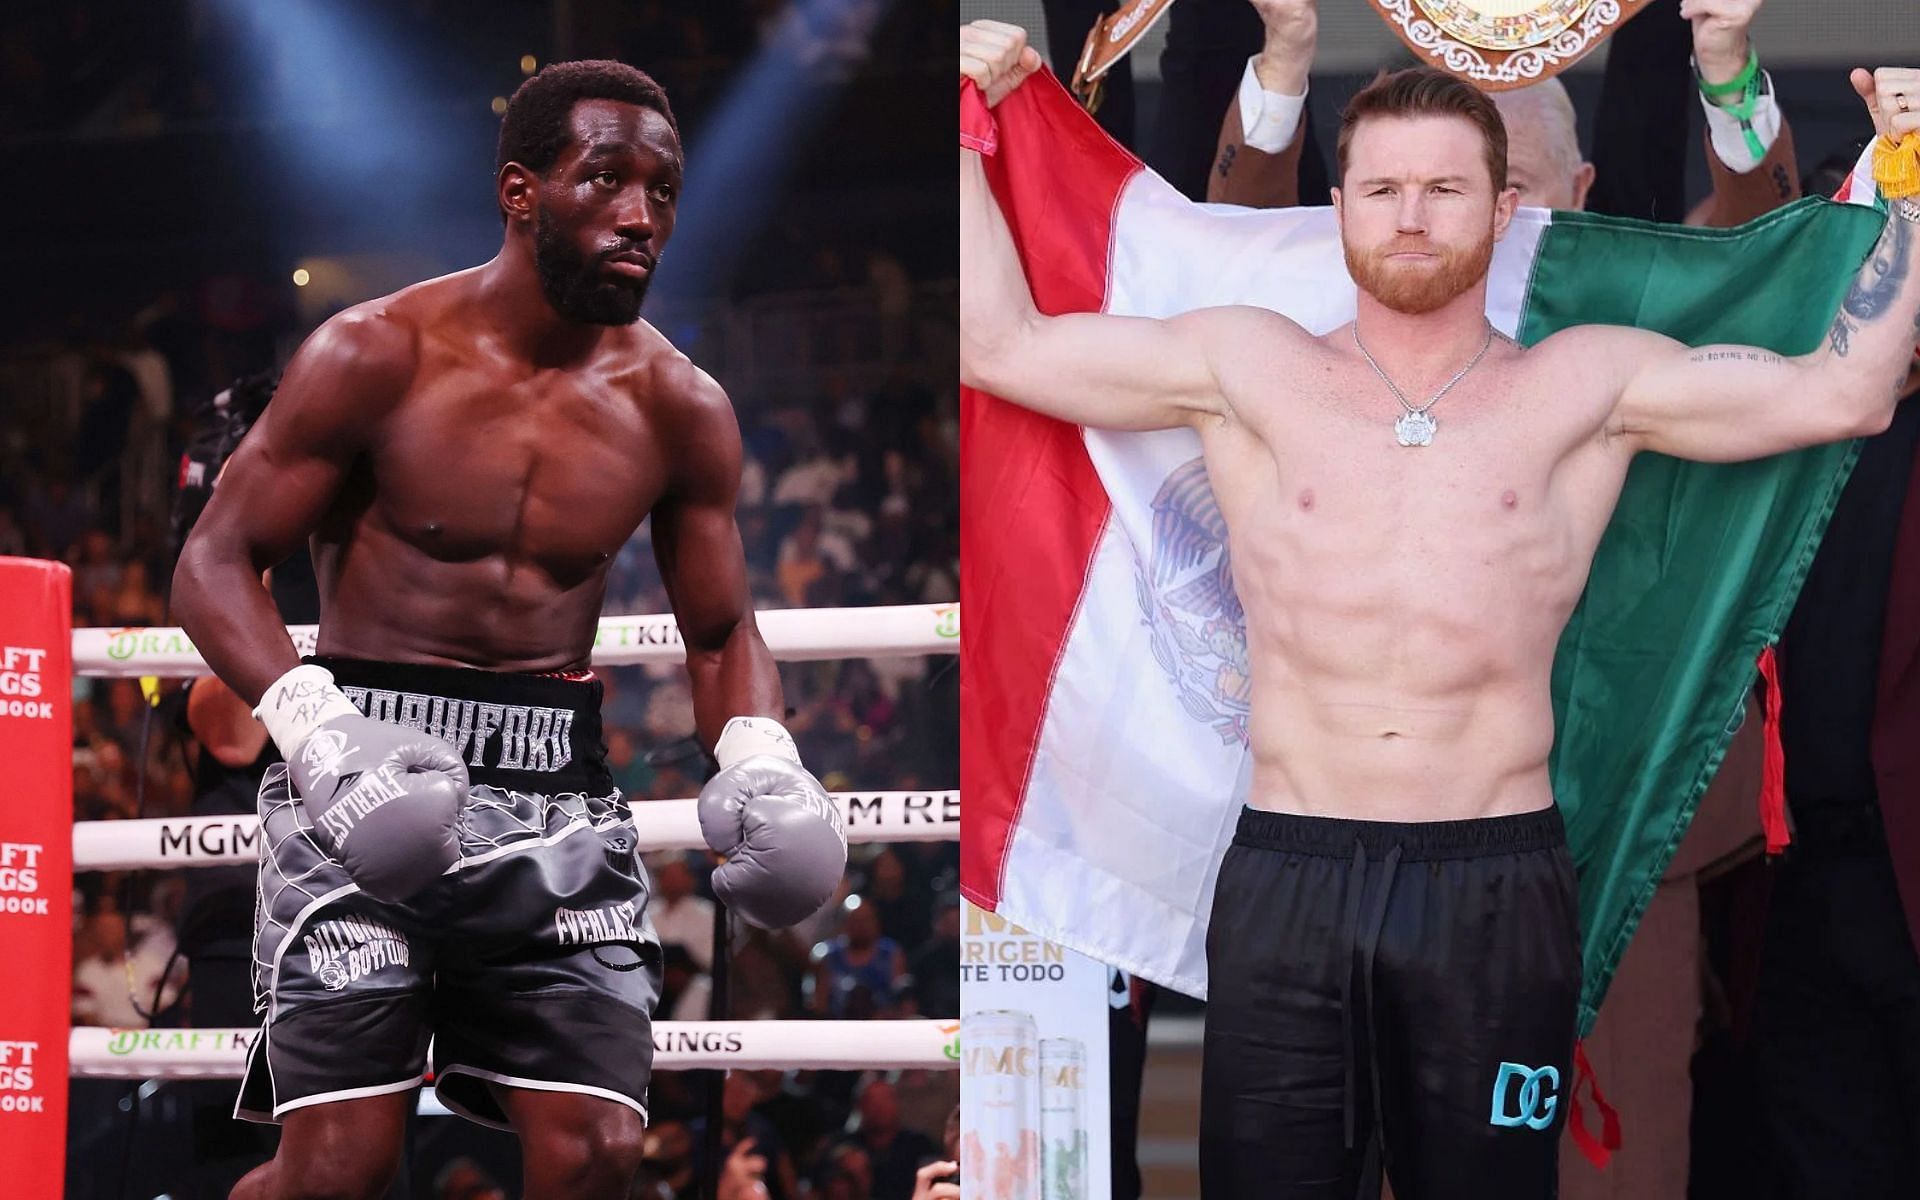 Terence Crawford (left) versus Canelo Alvarez (right) will likely not happen, says Eddie Hearn [Images Courtesy: @GettyImages]